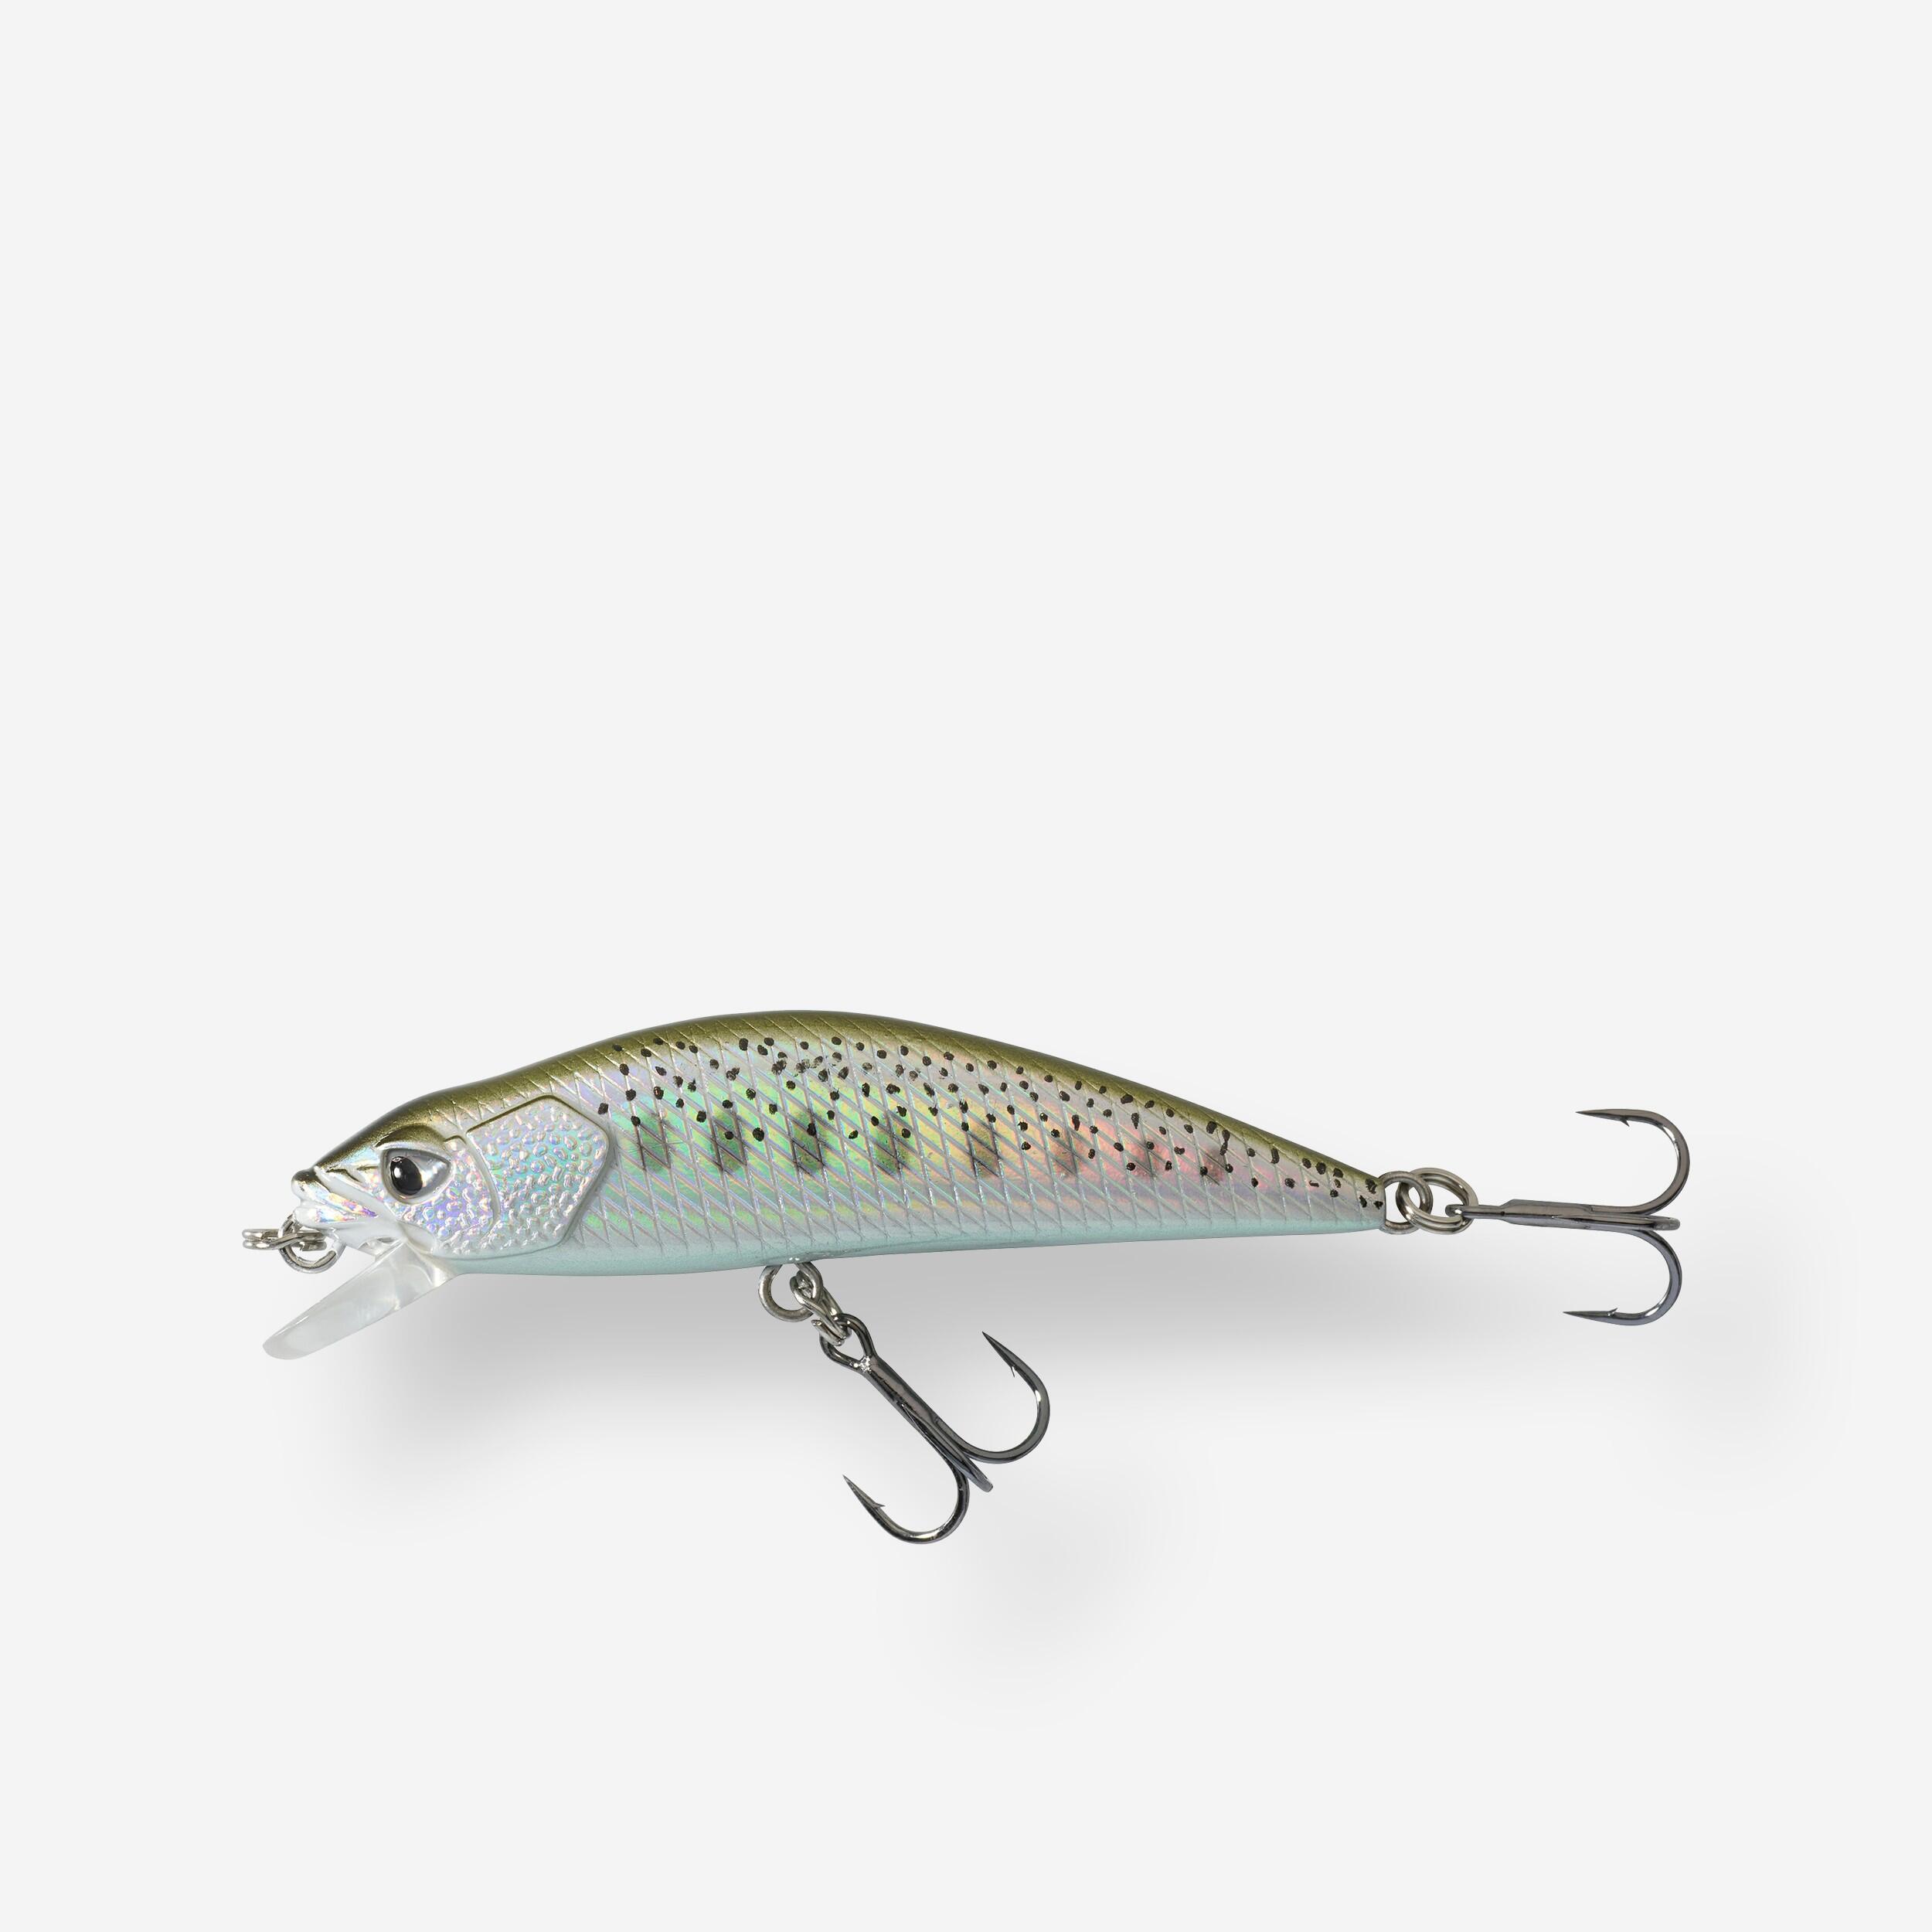 MINNOW HARD LURE FOR TROUT WXM  MNWFS US 65 YAMAME 1/4